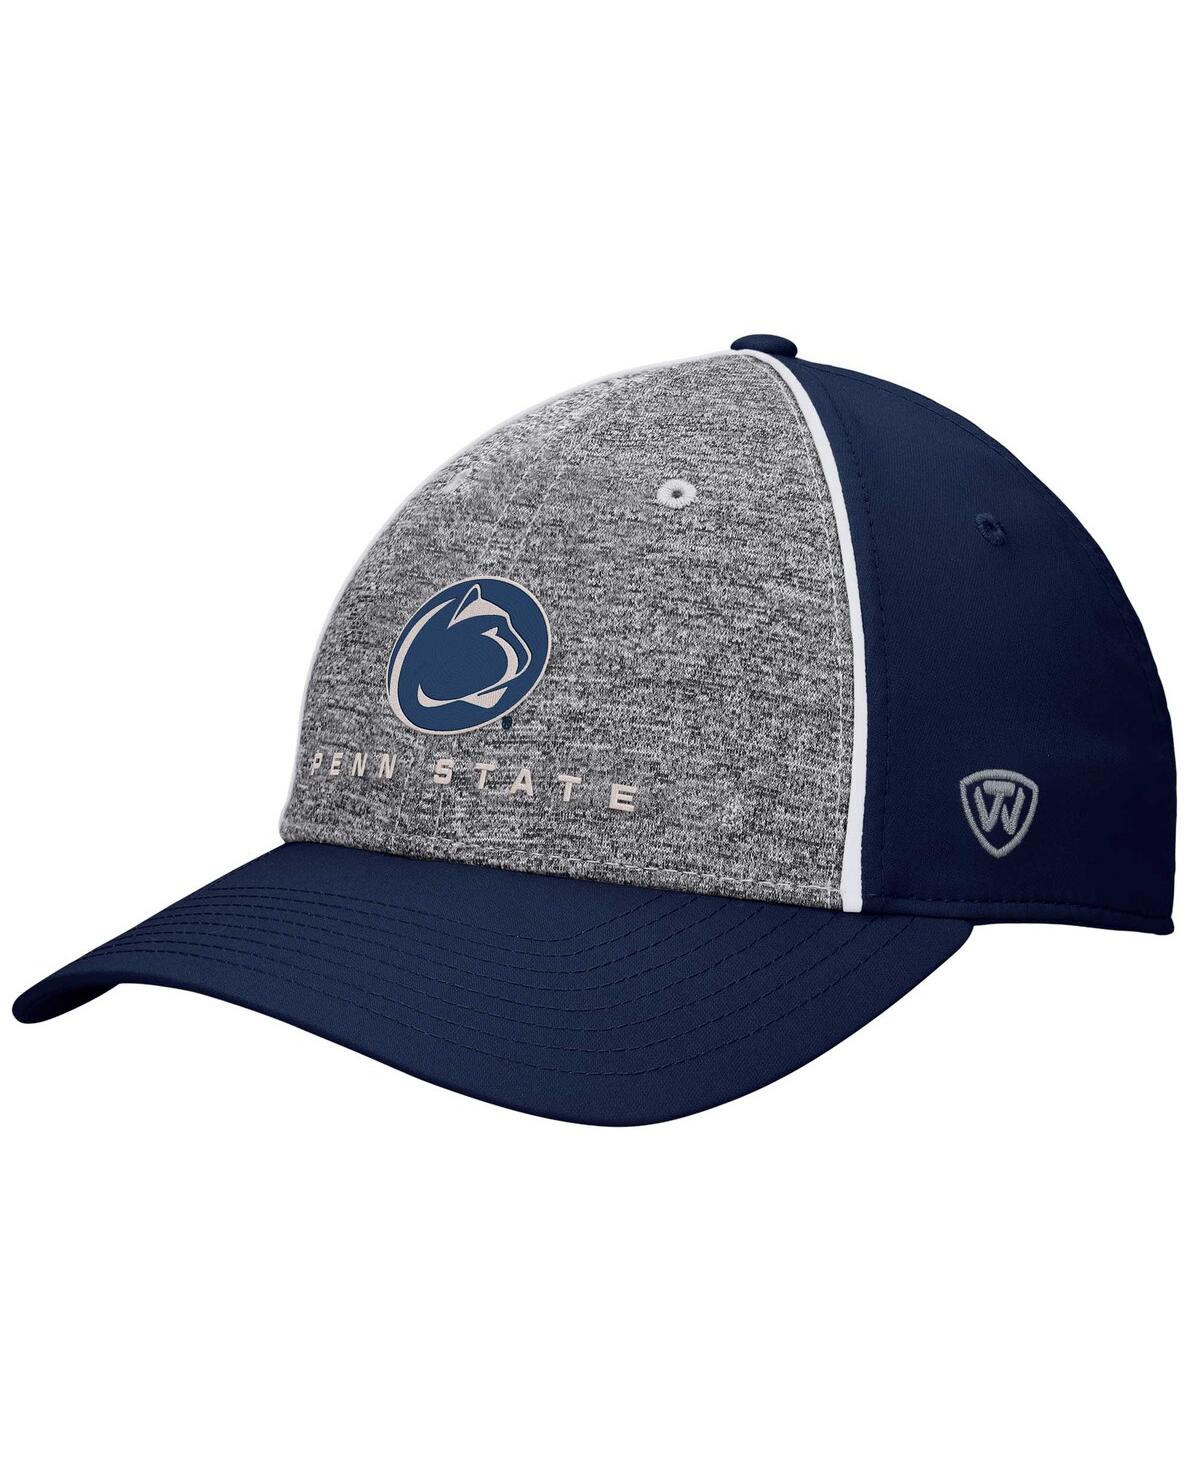 Top Of The World Men's  Heather Gray Penn State Nittany Lions Nimble Adjustable Hat